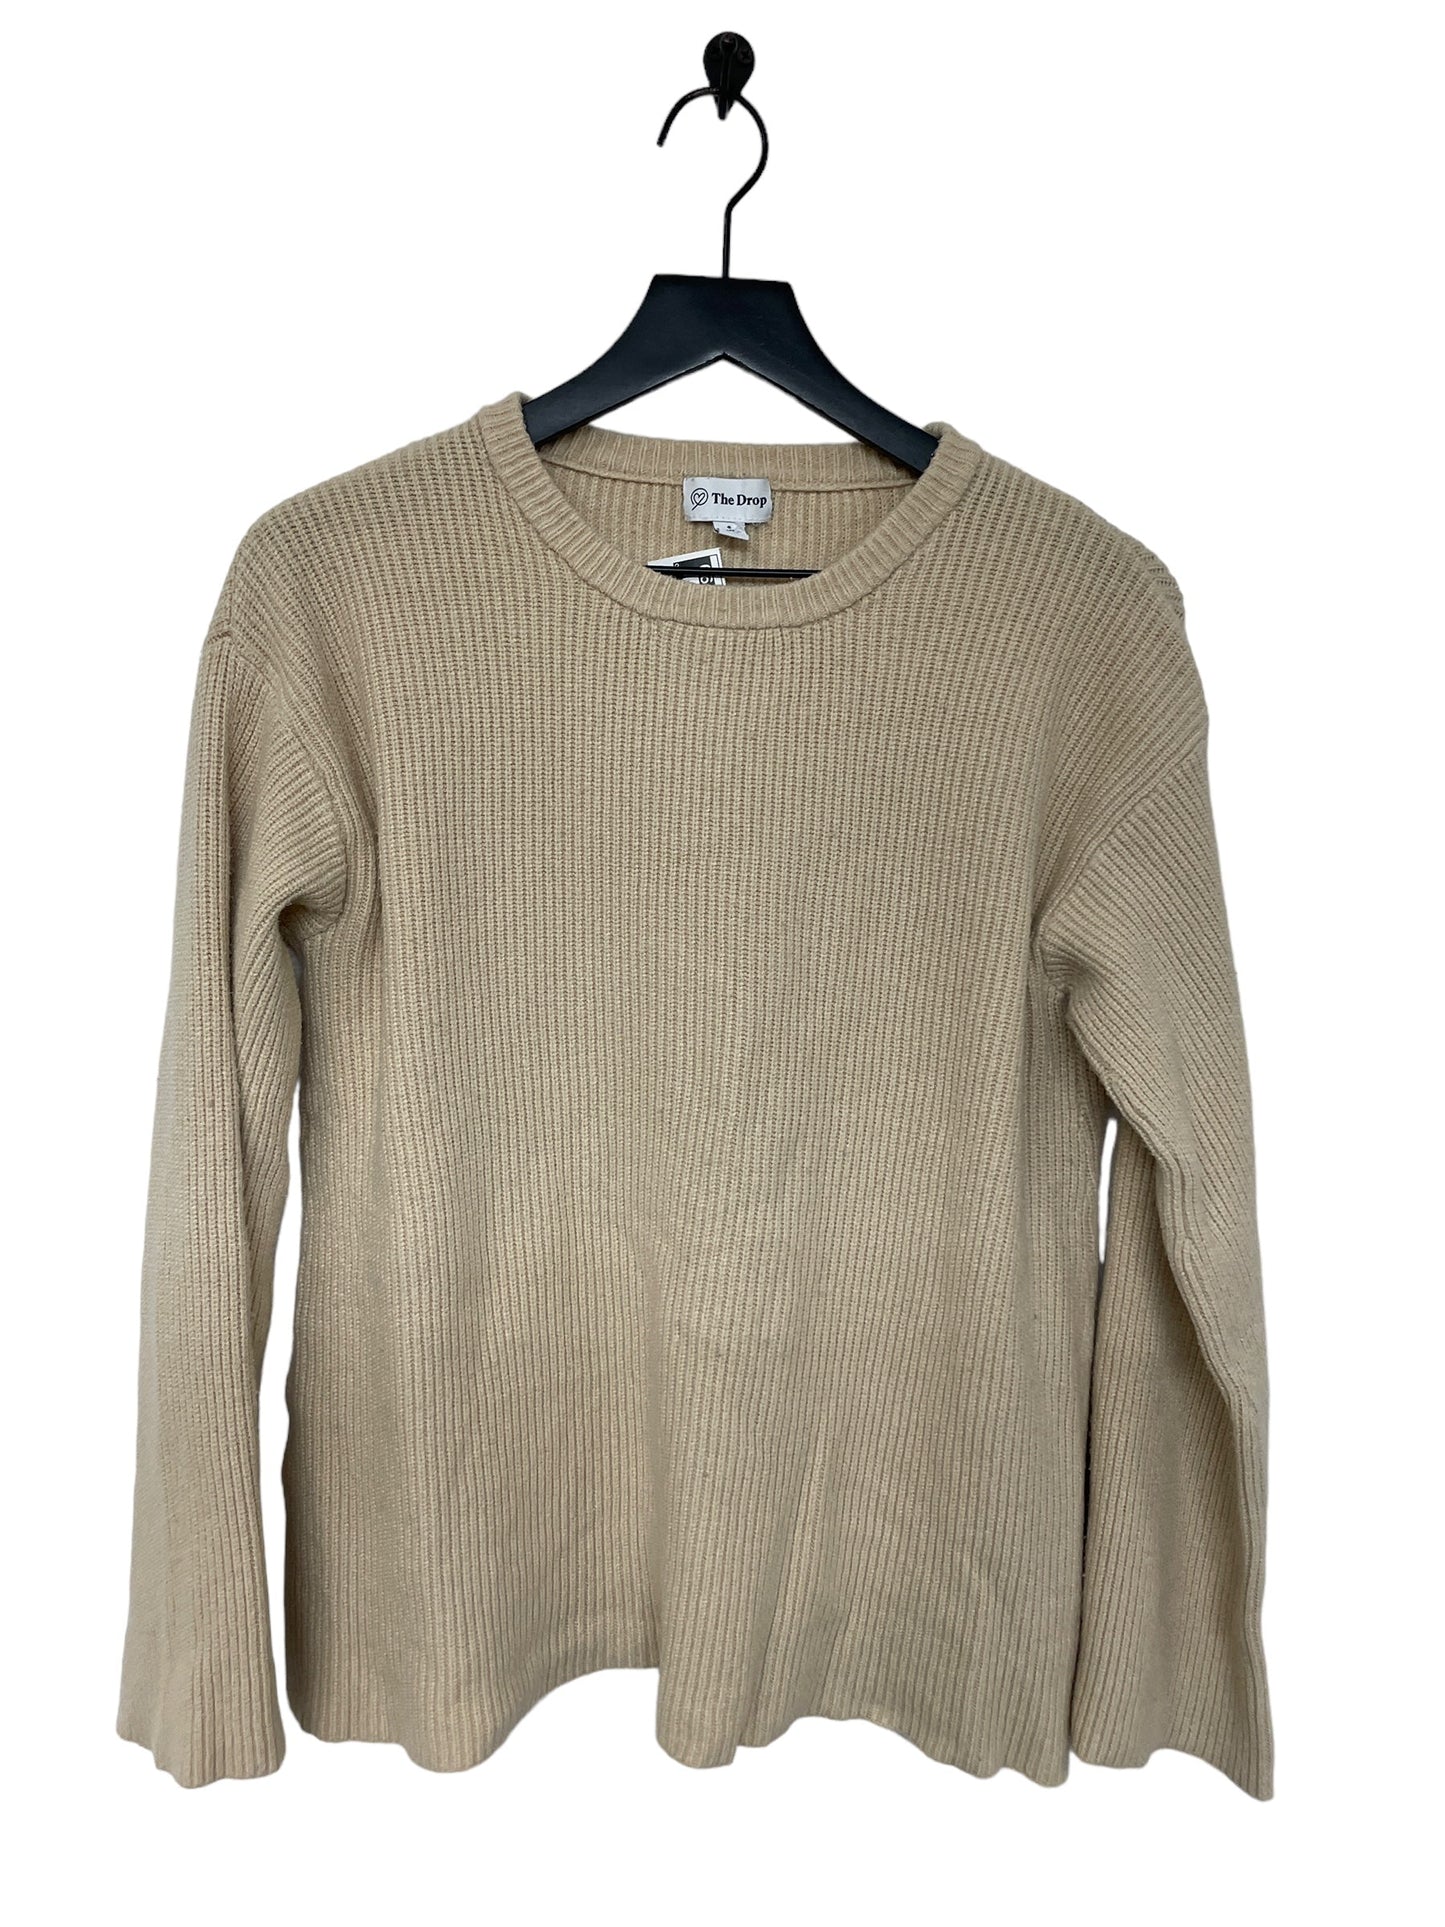 Beige Sweater Clothes Mentor, Size S